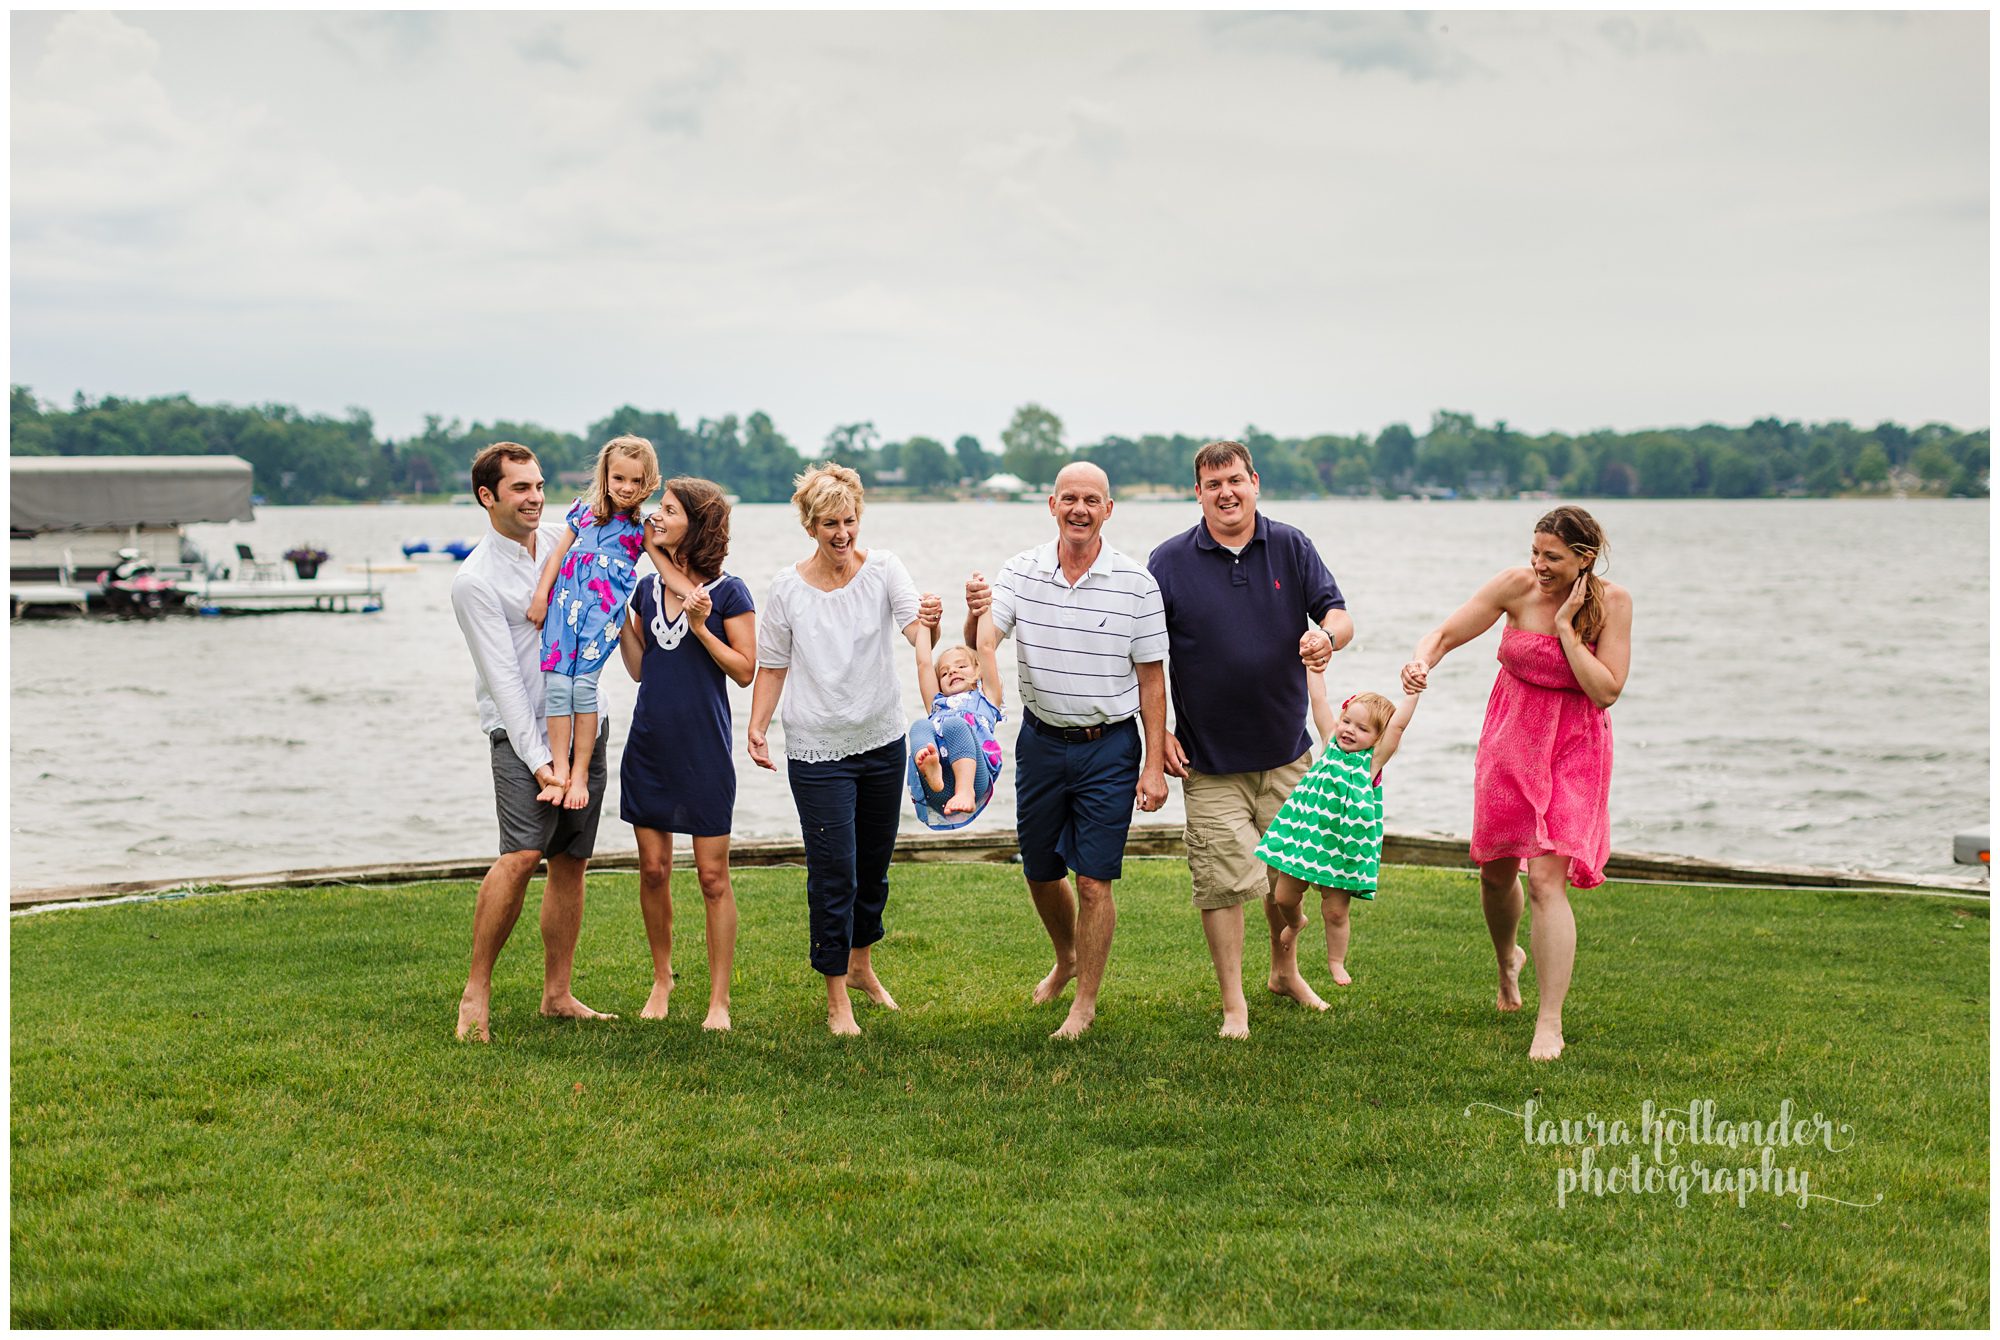 extended family portraits at the lake, backyard lake portraits, siblings and grandparents, Lifestyle family portraits, Laura Hollander Photography, Lake Goguac